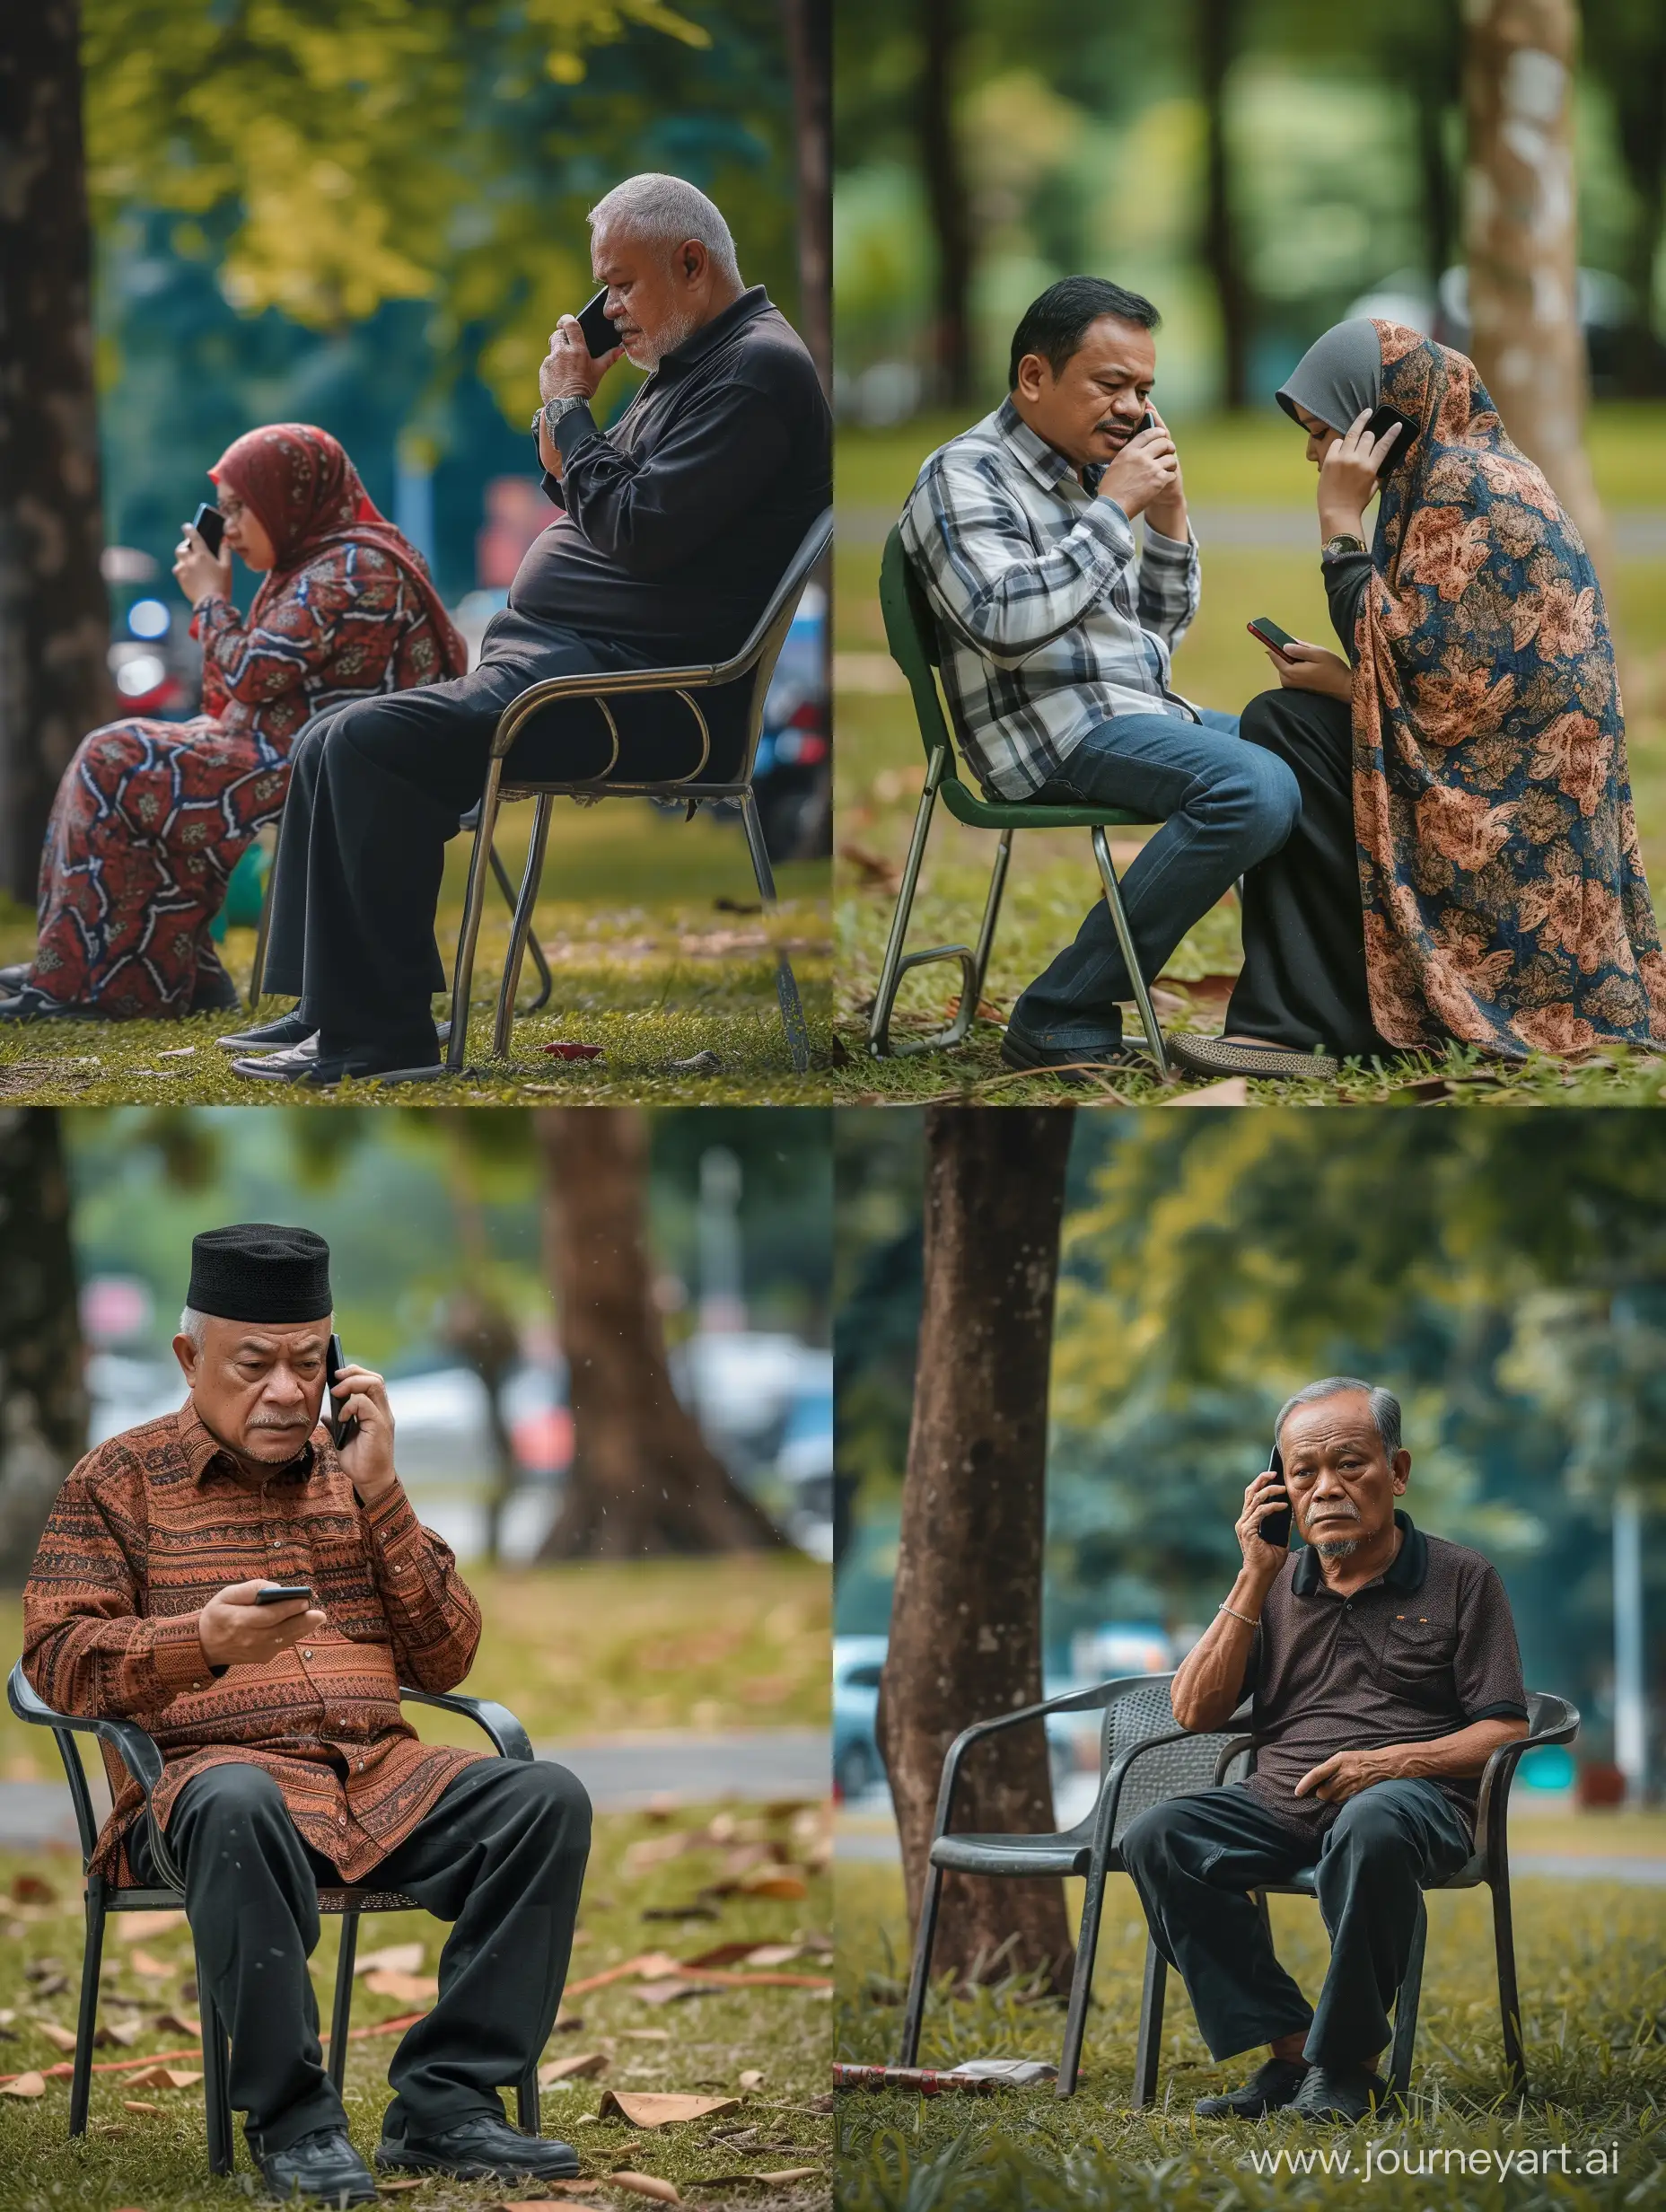 Malay-Man-Relaxing-with-Partner-in-Park-Captured-by-Canon-EOS1D-X-Mark-III-DSLR